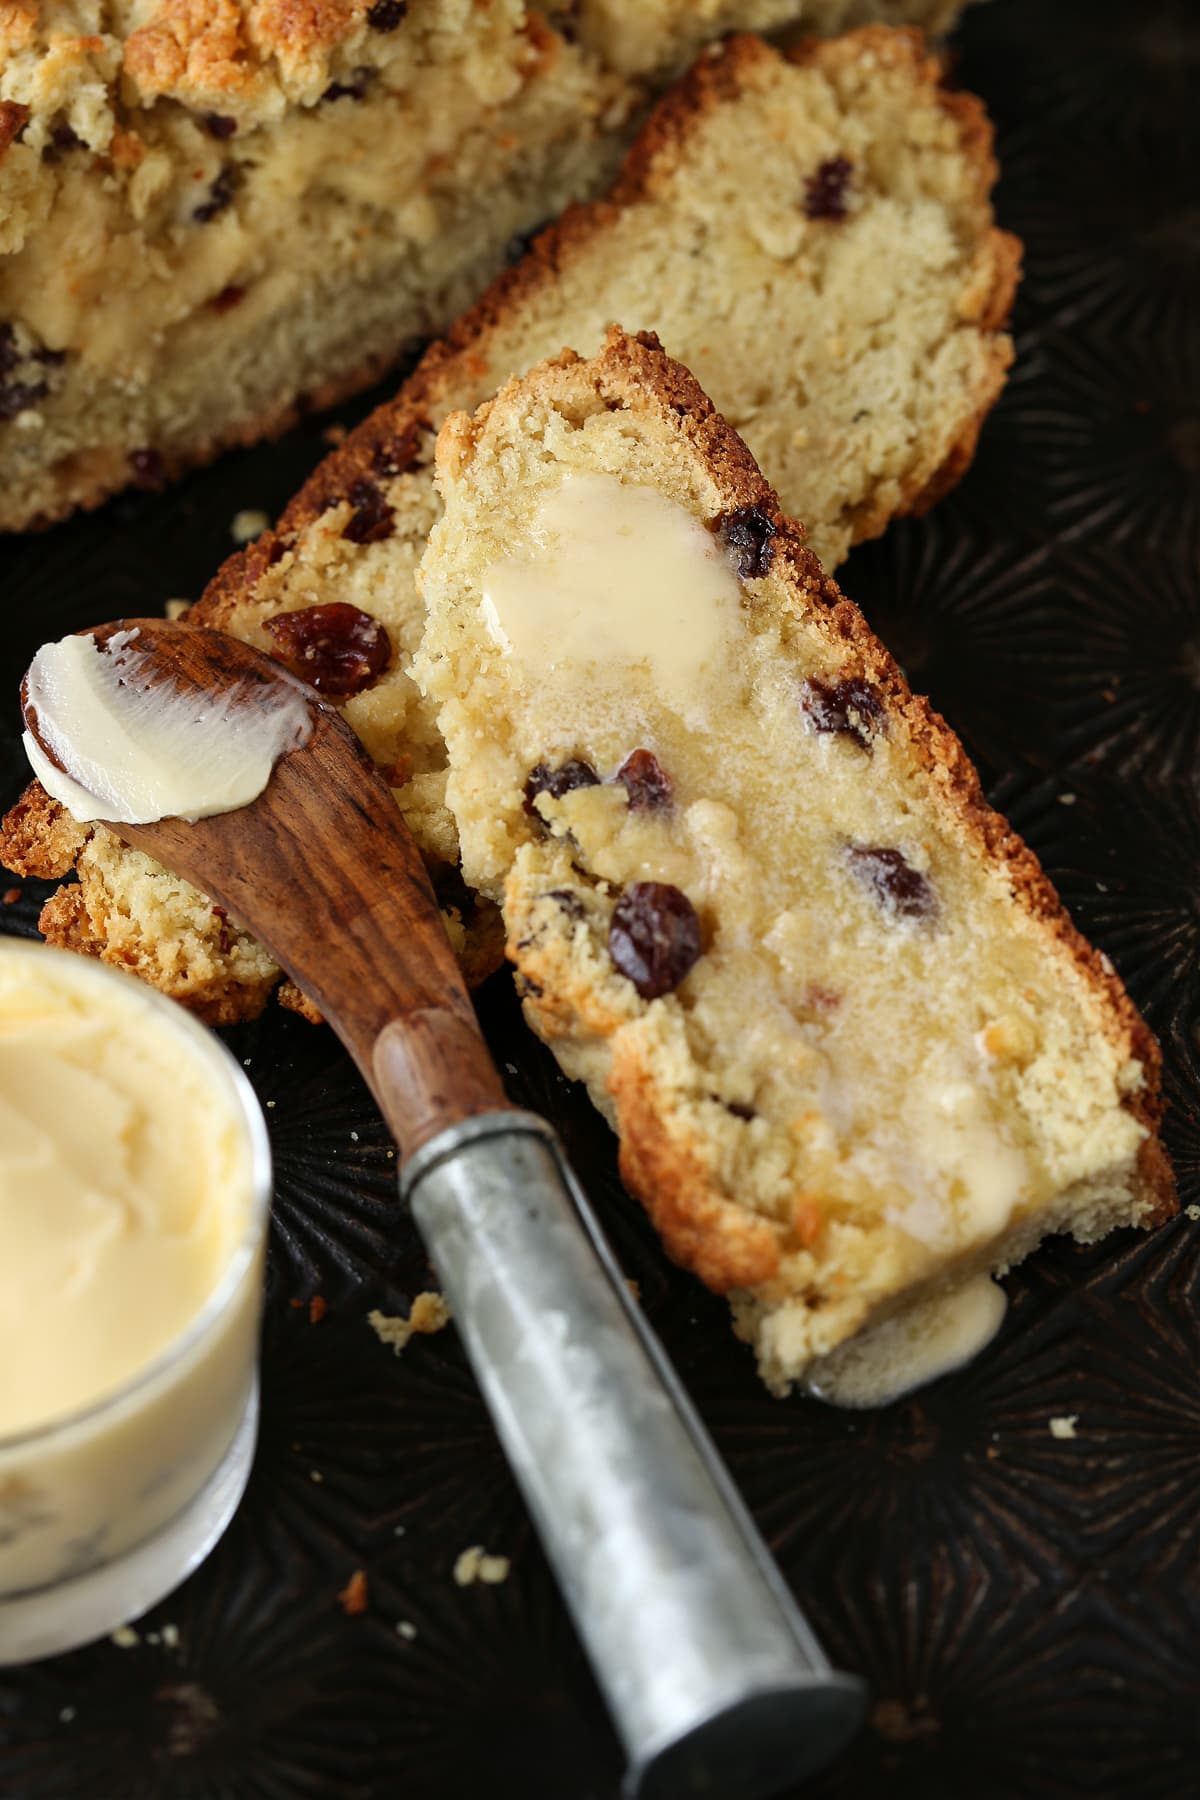 Sliced soda bread with raisins and butter